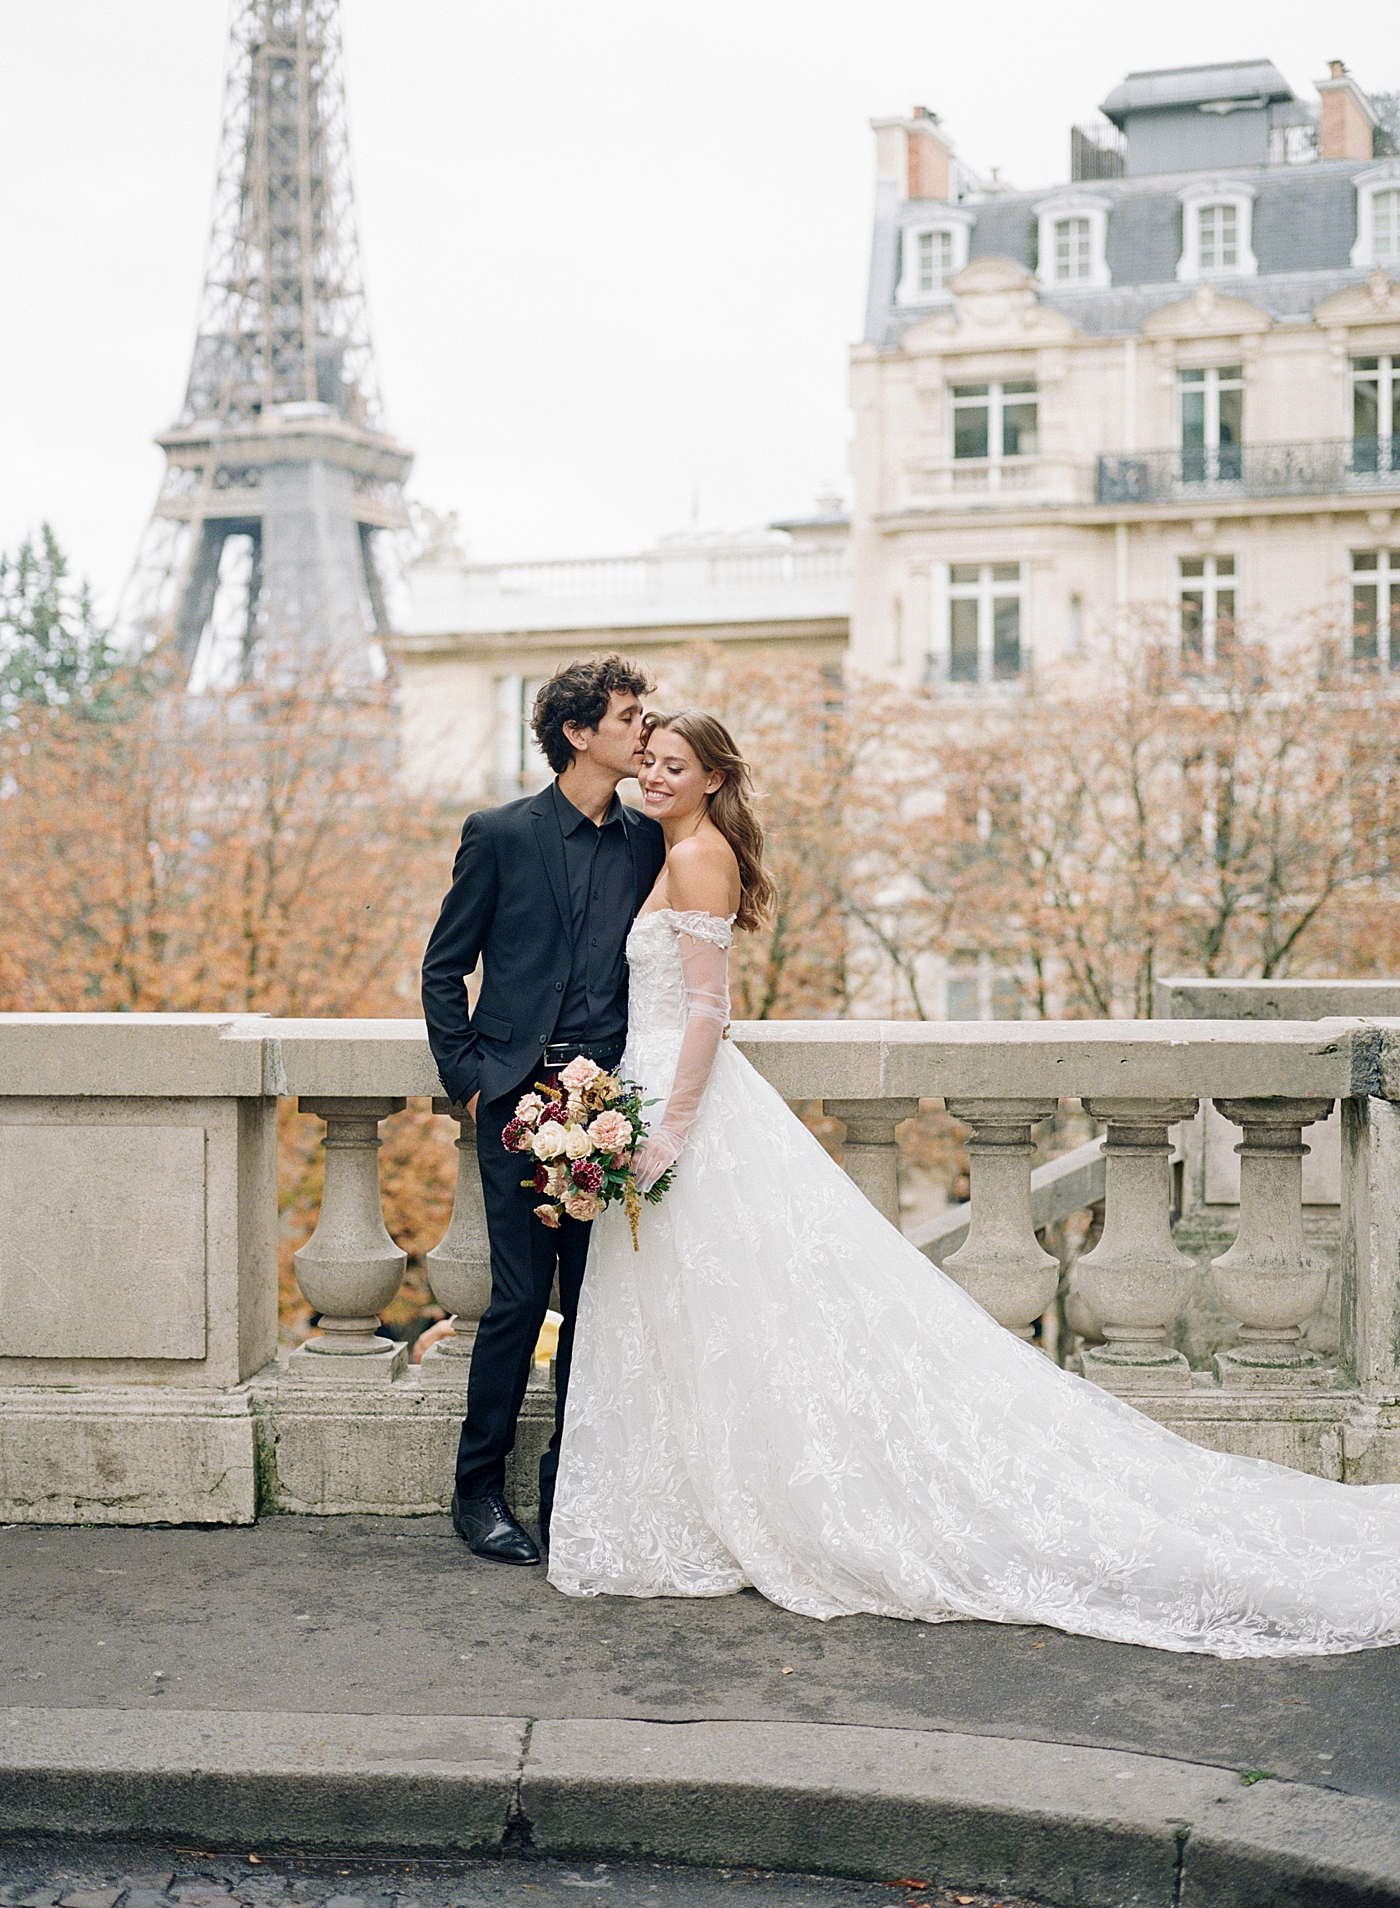 Image of a bride and groom embracing in Paris with the Eiffel tower in the background | Image by Hope Helmuth Photography